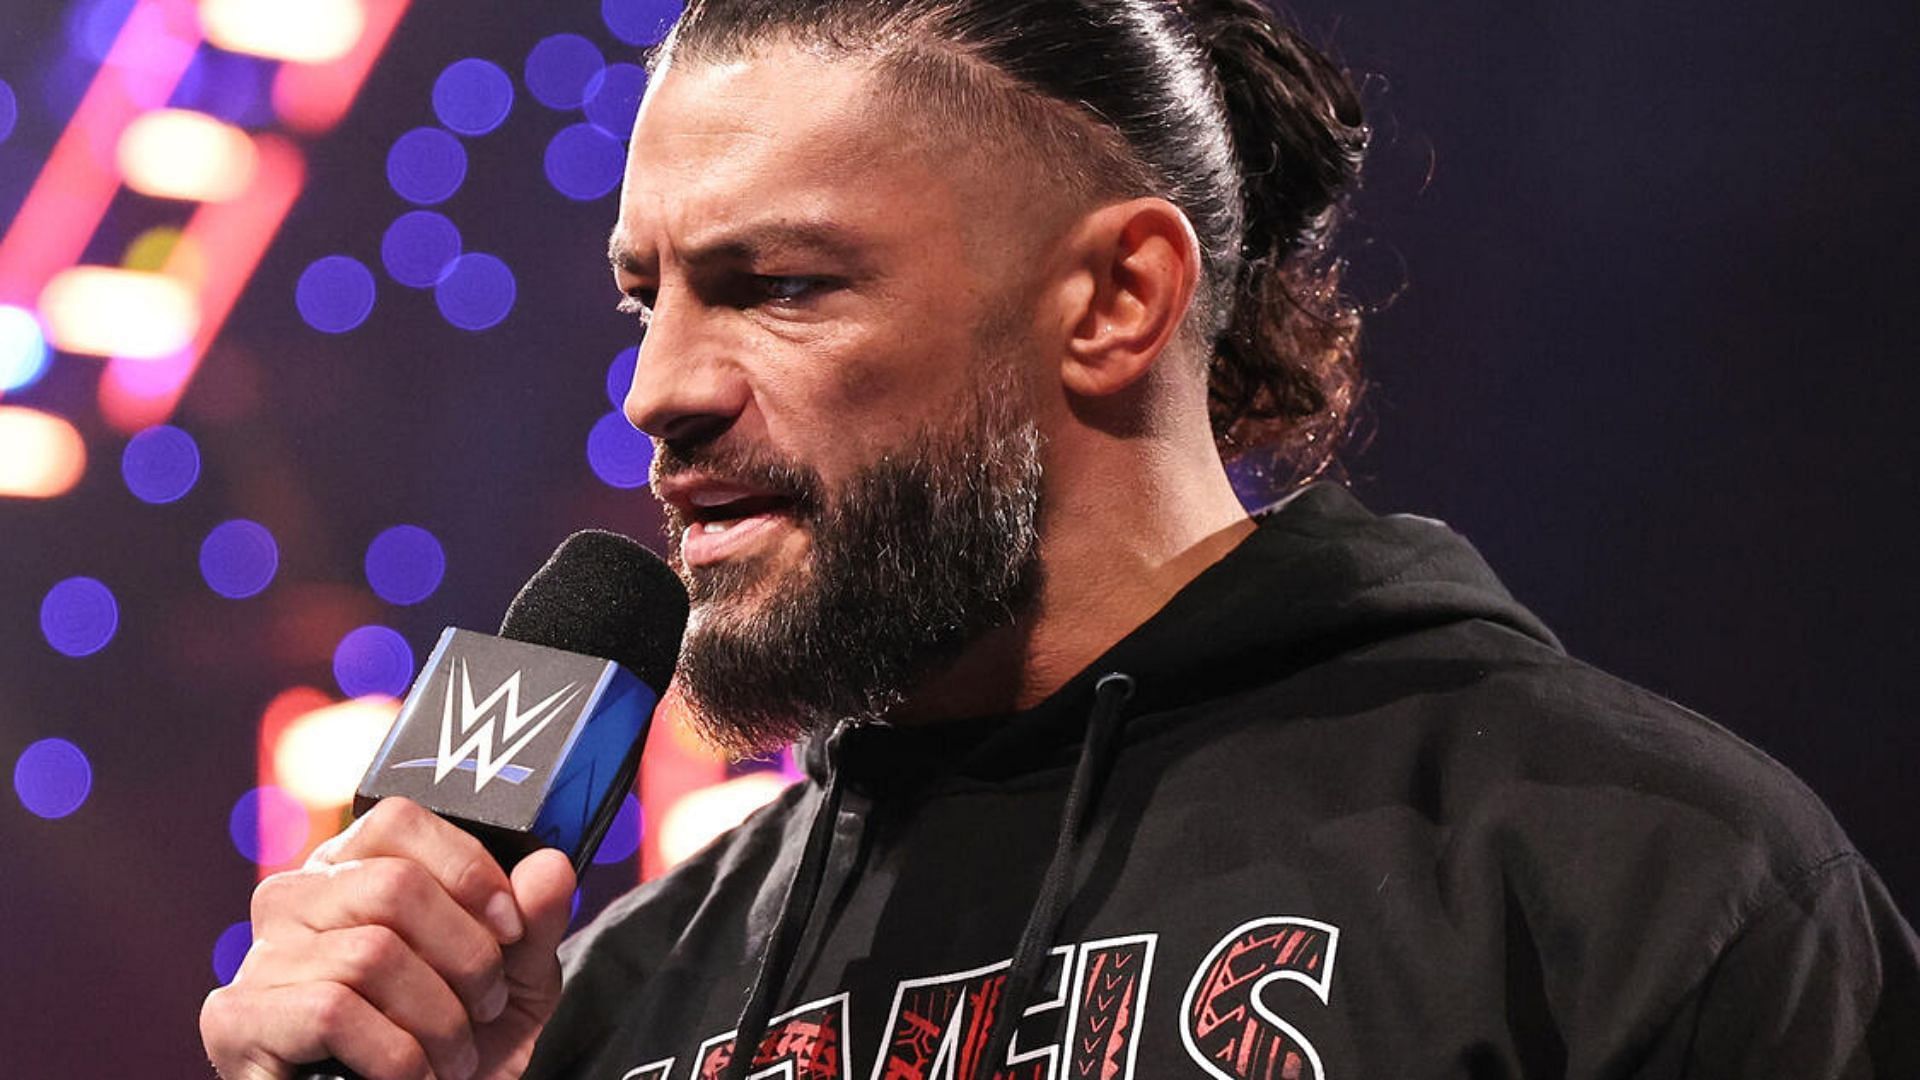 Reigns is currently on the SmackDown roster.